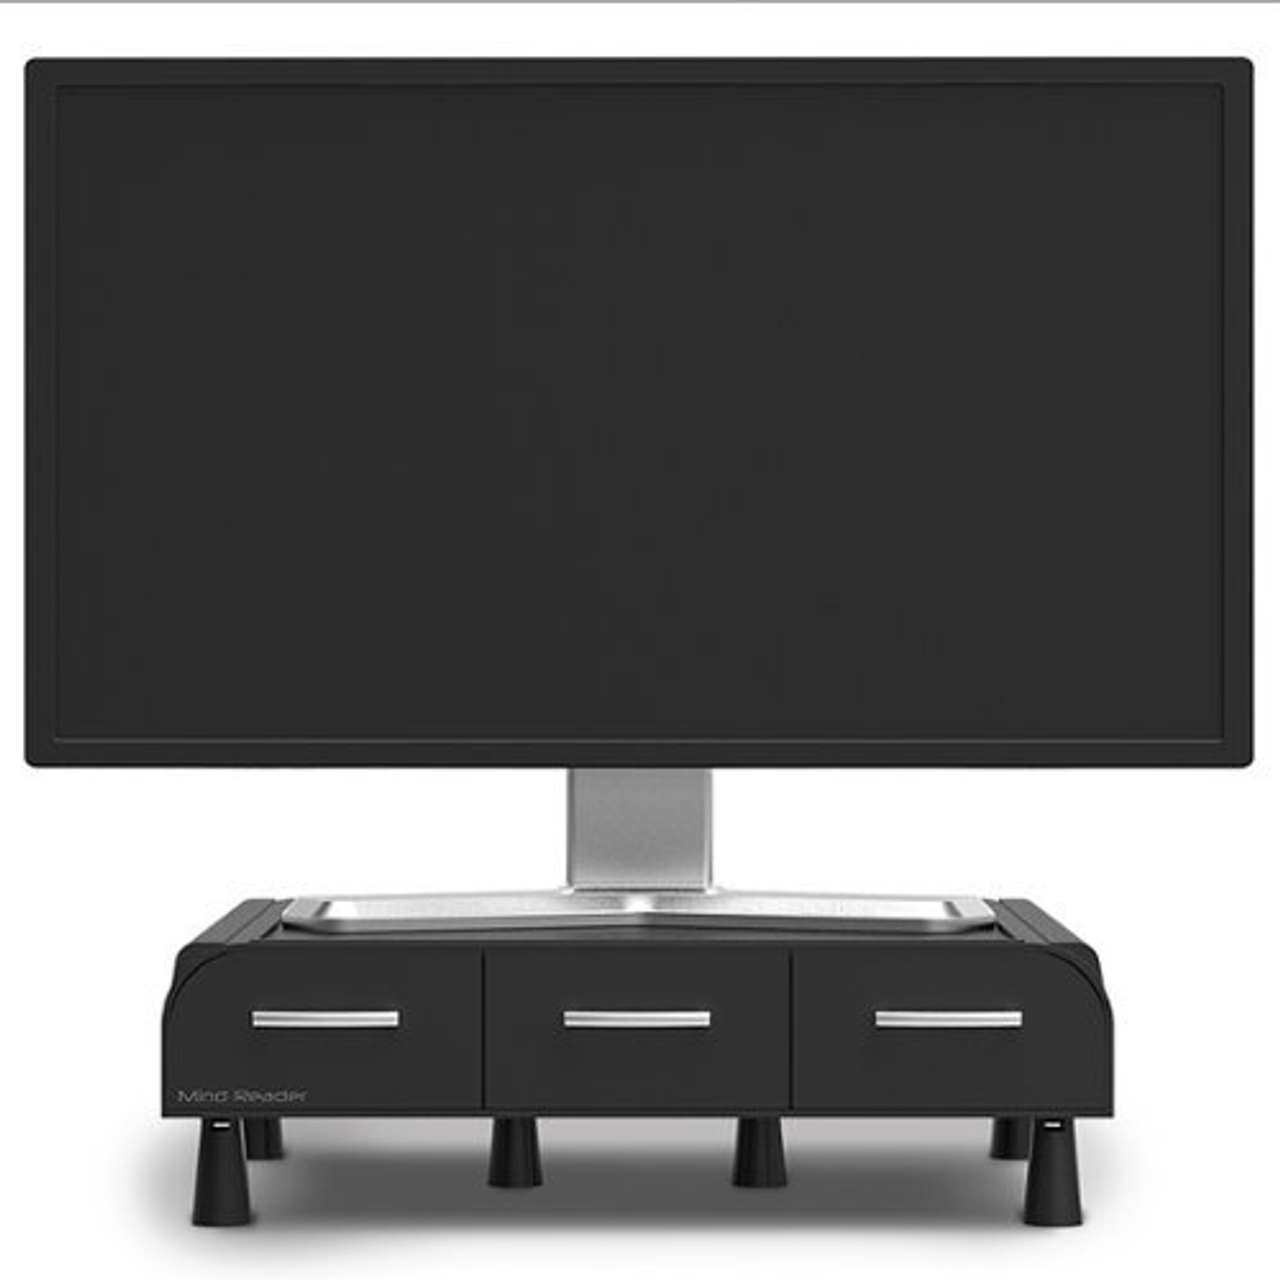 Mind Reader ' Perch' Laptop and Monitor Stand and Desk Organizer, Black - Black